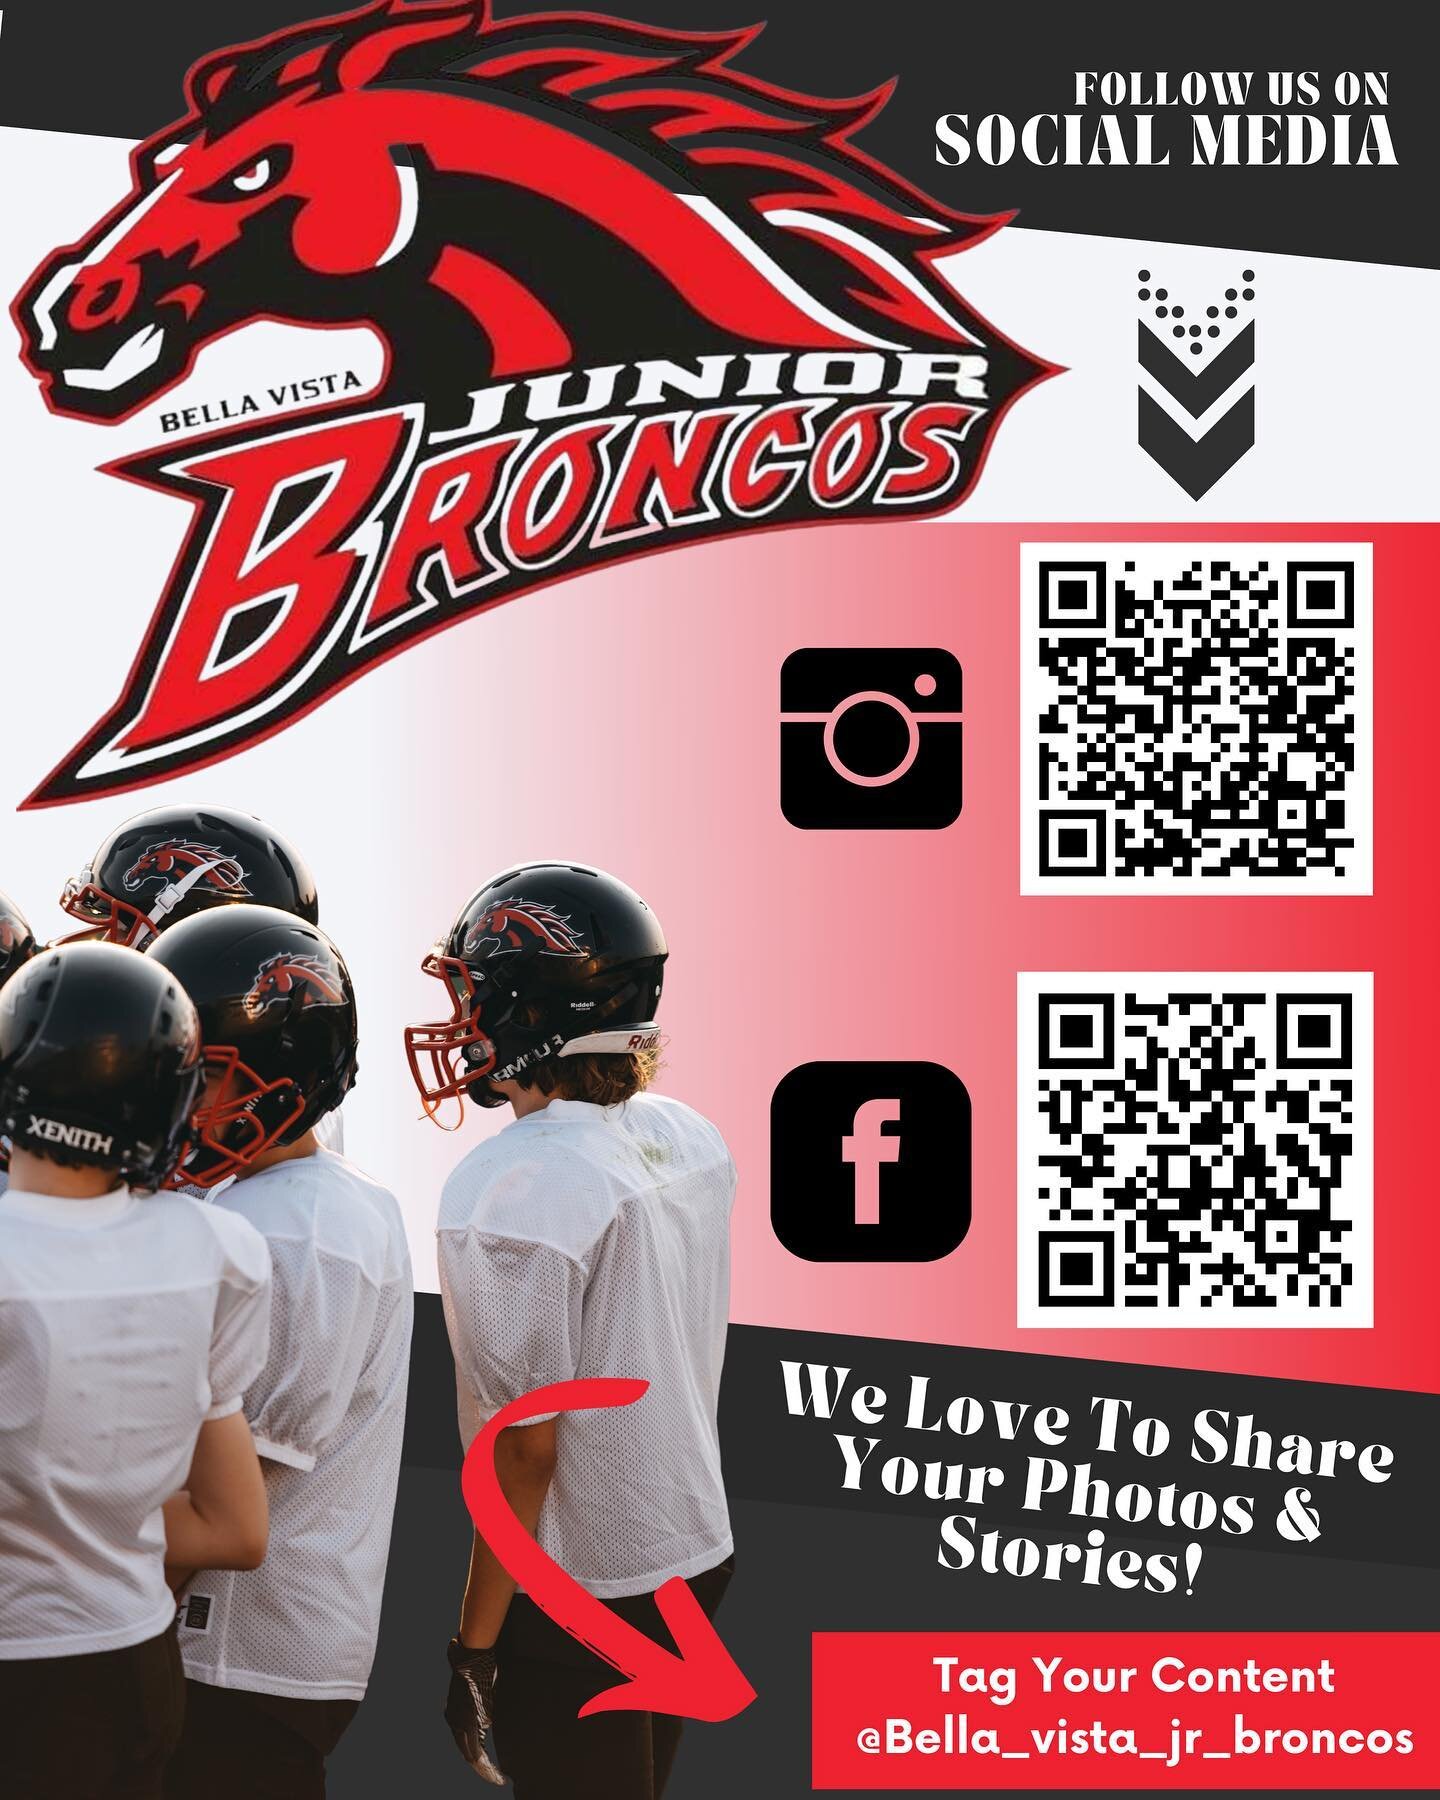 BVJB athletes and families, we love to share your stories and photos from practice and games! Make sure to tag us @bella_vista_jr_broncos so we can see! Please Note: accounts must be public for us to view tags ❤️